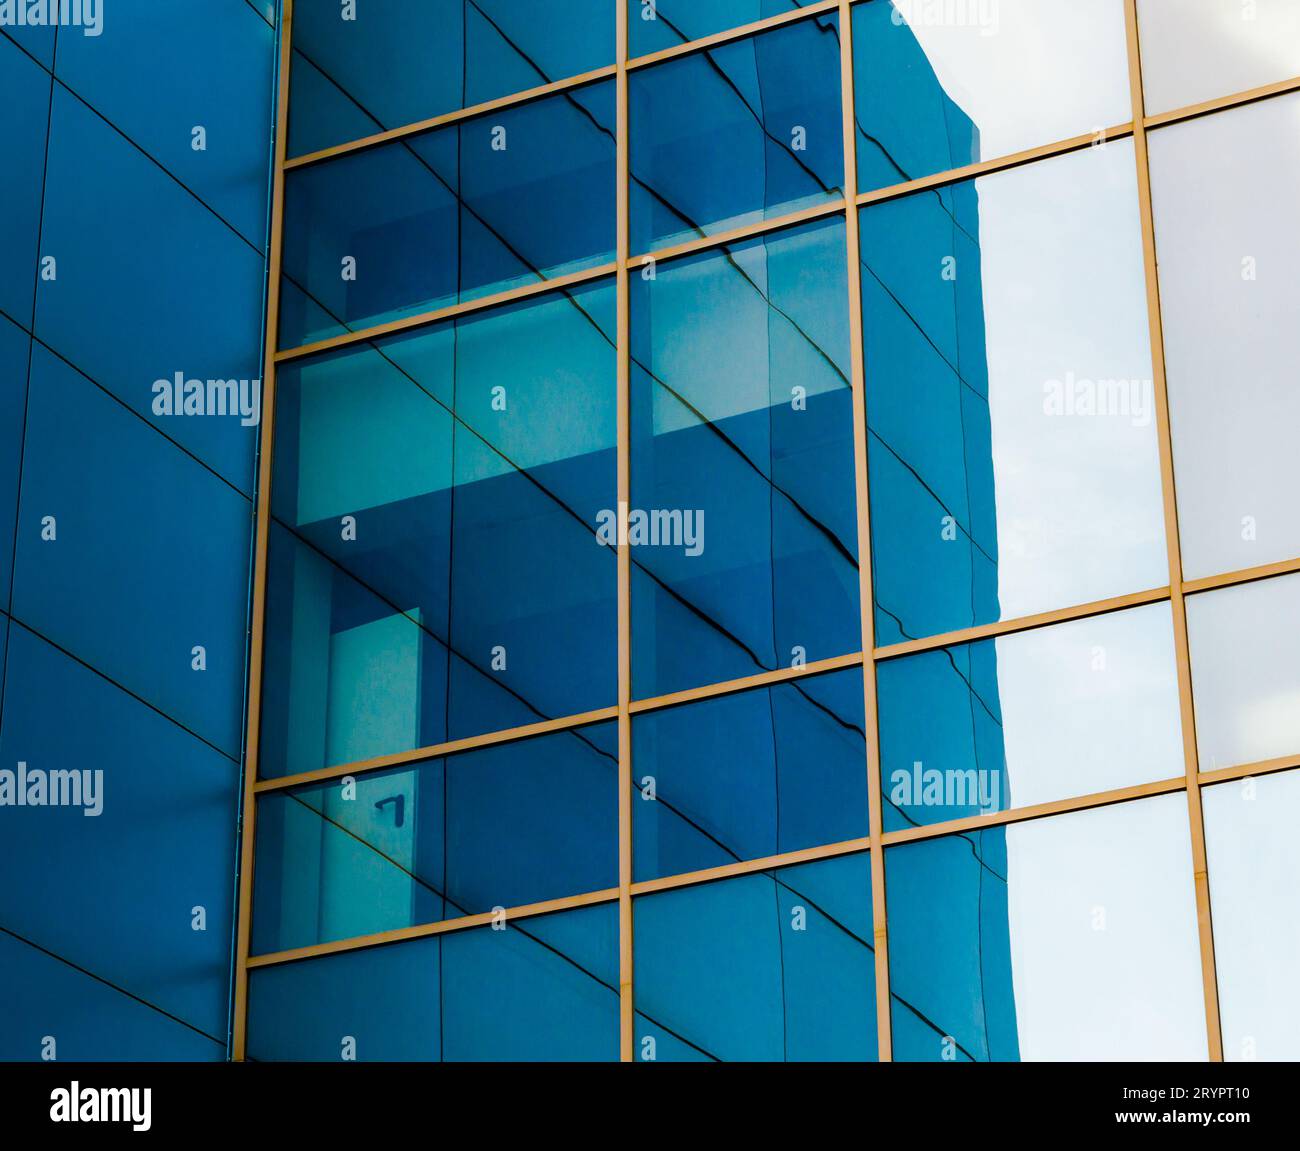 Mirrored windows of the facade of an office building with blue panels and yellow window frames with a distorted reflection of th Stock Photo